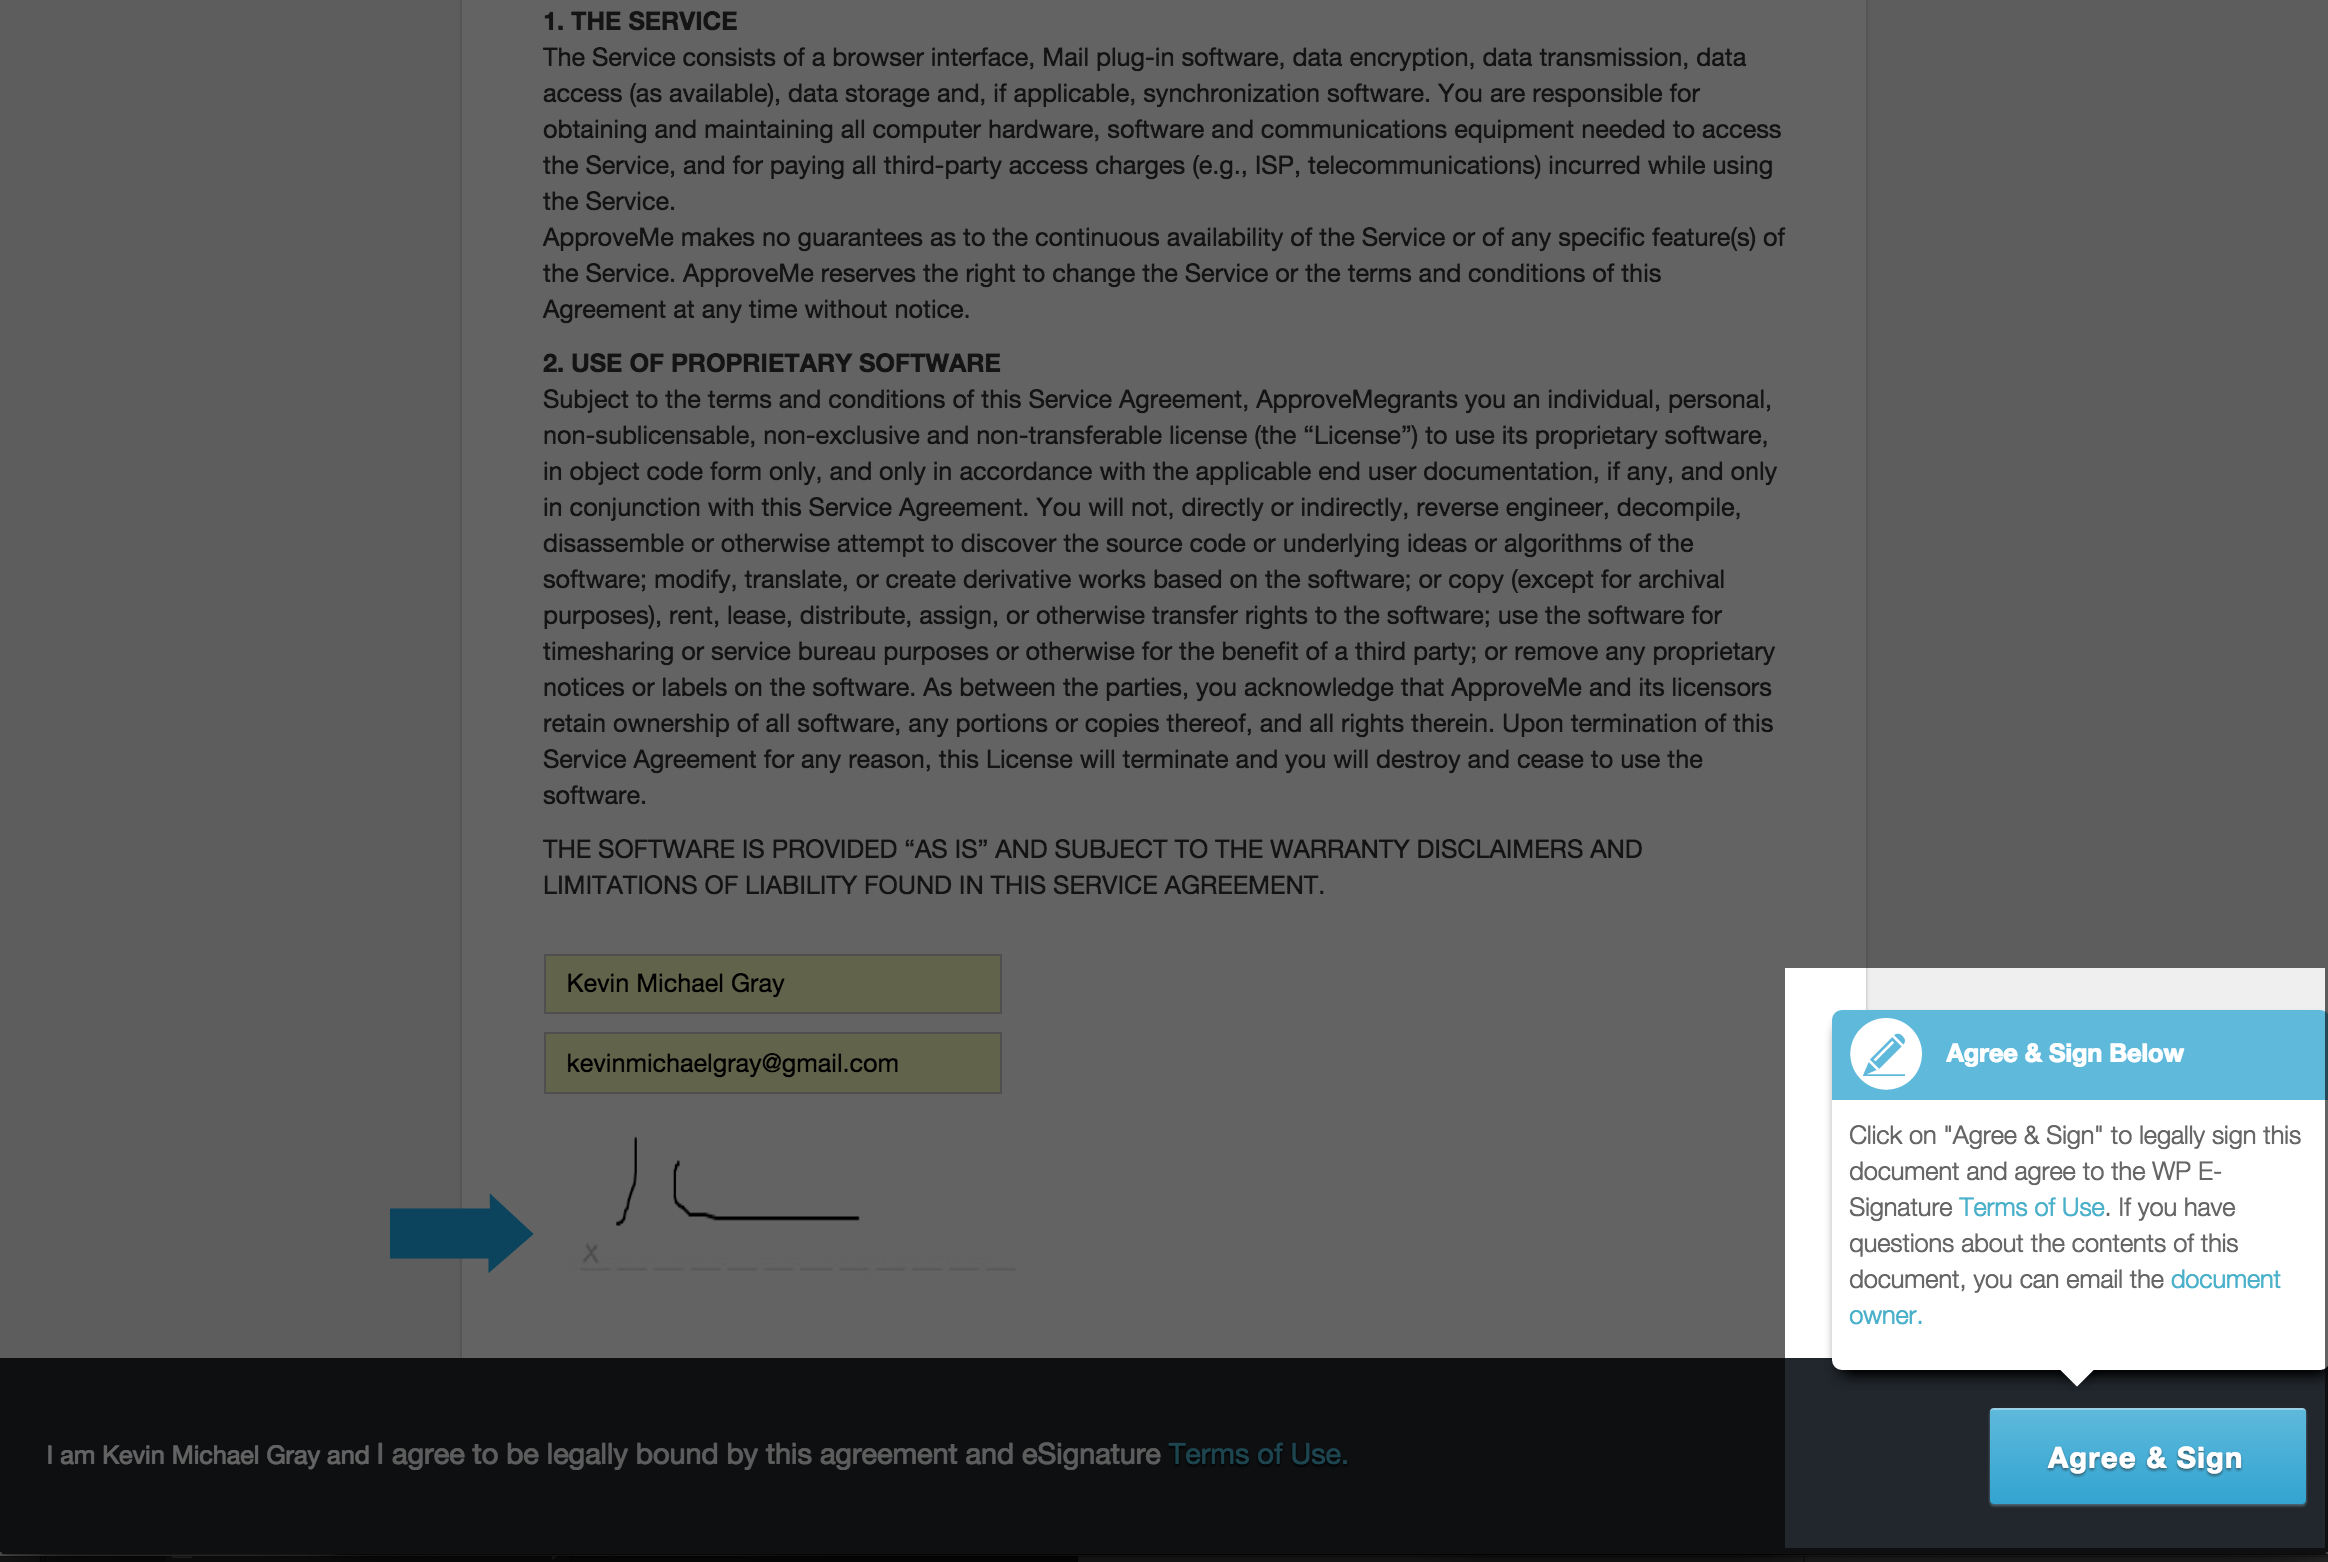 **Document Signing Options (optional):** The powerful WP E-Signature tool by ApproveMe features plenty of customizable options including: Signing reminder Emails, Attach PDF to emails, Dropbox Sync, Auto Register WordPress Users, and TONS more. To read all about the available add-on features (which come with the business license) please see: [https://www.approveme.com/esign-integrations](http://aprv.me/2lNRp2C)